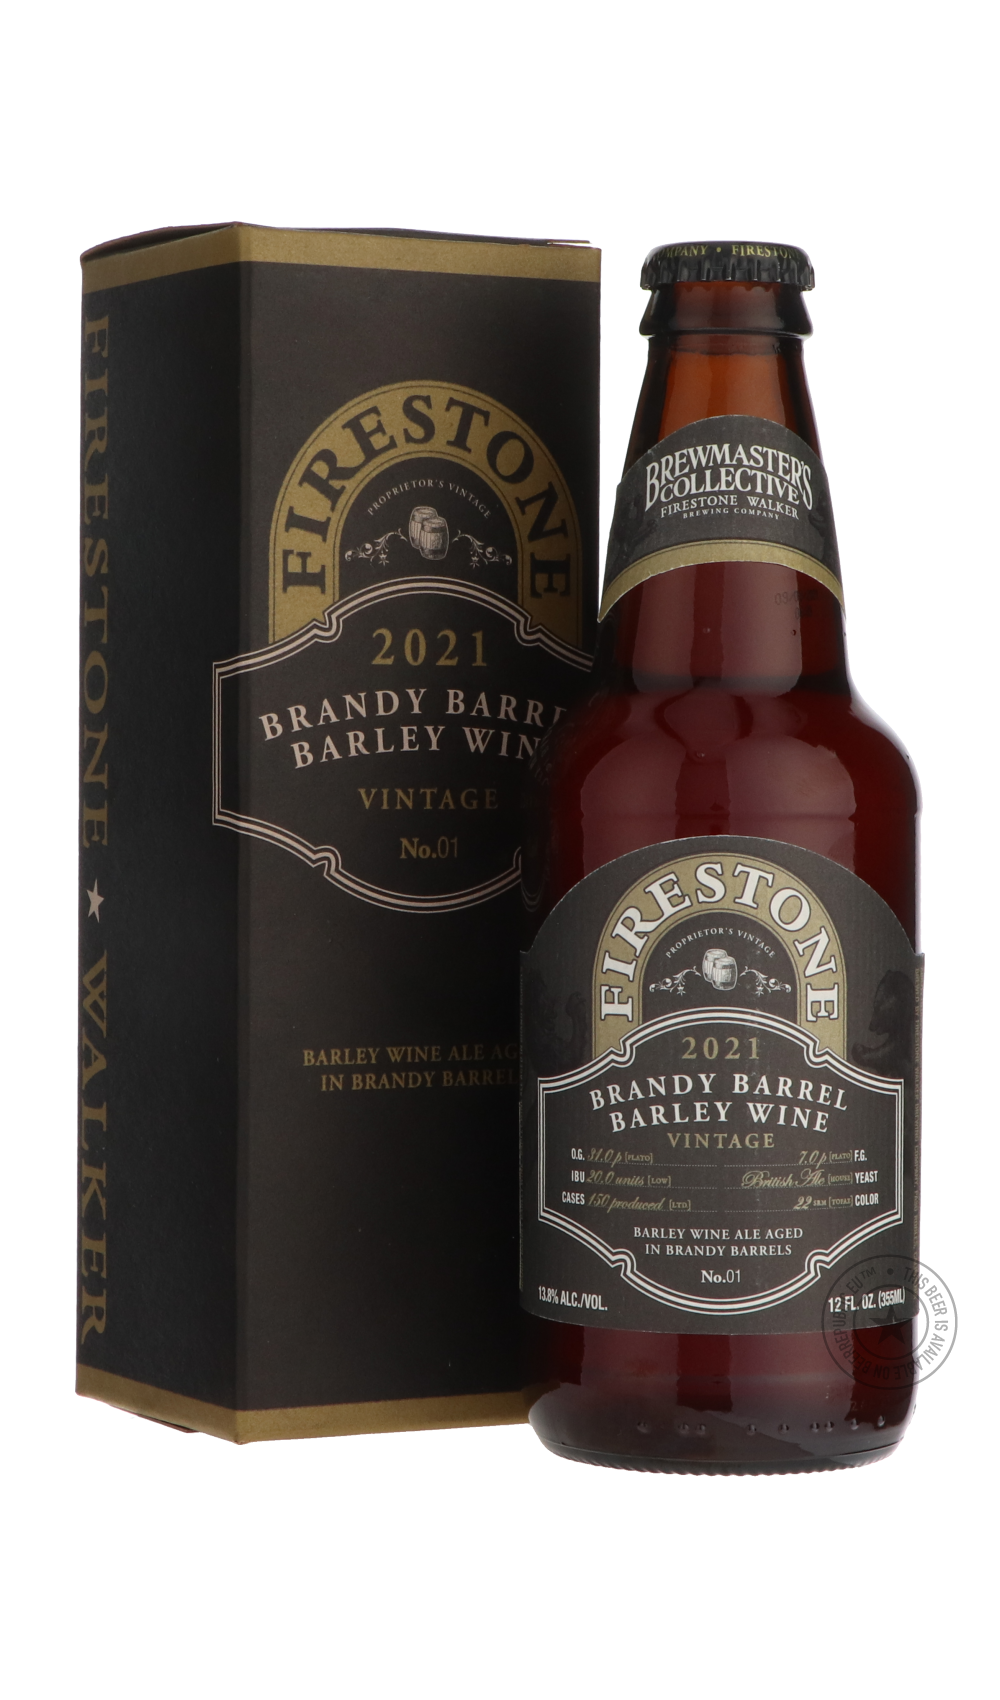 -Firestone Walker- Brandy Barrel Barley Wine-Brown & Dark- Only @ Beer Republic - The best online beer store for American & Canadian craft beer - Buy beer online from the USA and Canada - Bier online kopen - Amerikaans bier kopen - Craft beer store - Craft beer kopen - Amerikanisch bier kaufen - Bier online kaufen - Acheter biere online - IPA - Stout - Porter - New England IPA - Hazy IPA - Imperial Stout - Barrel Aged - Barrel Aged Imperial Stout - Brown - Dark beer - Blond - Blonde - Pilsner - Lager - Whea